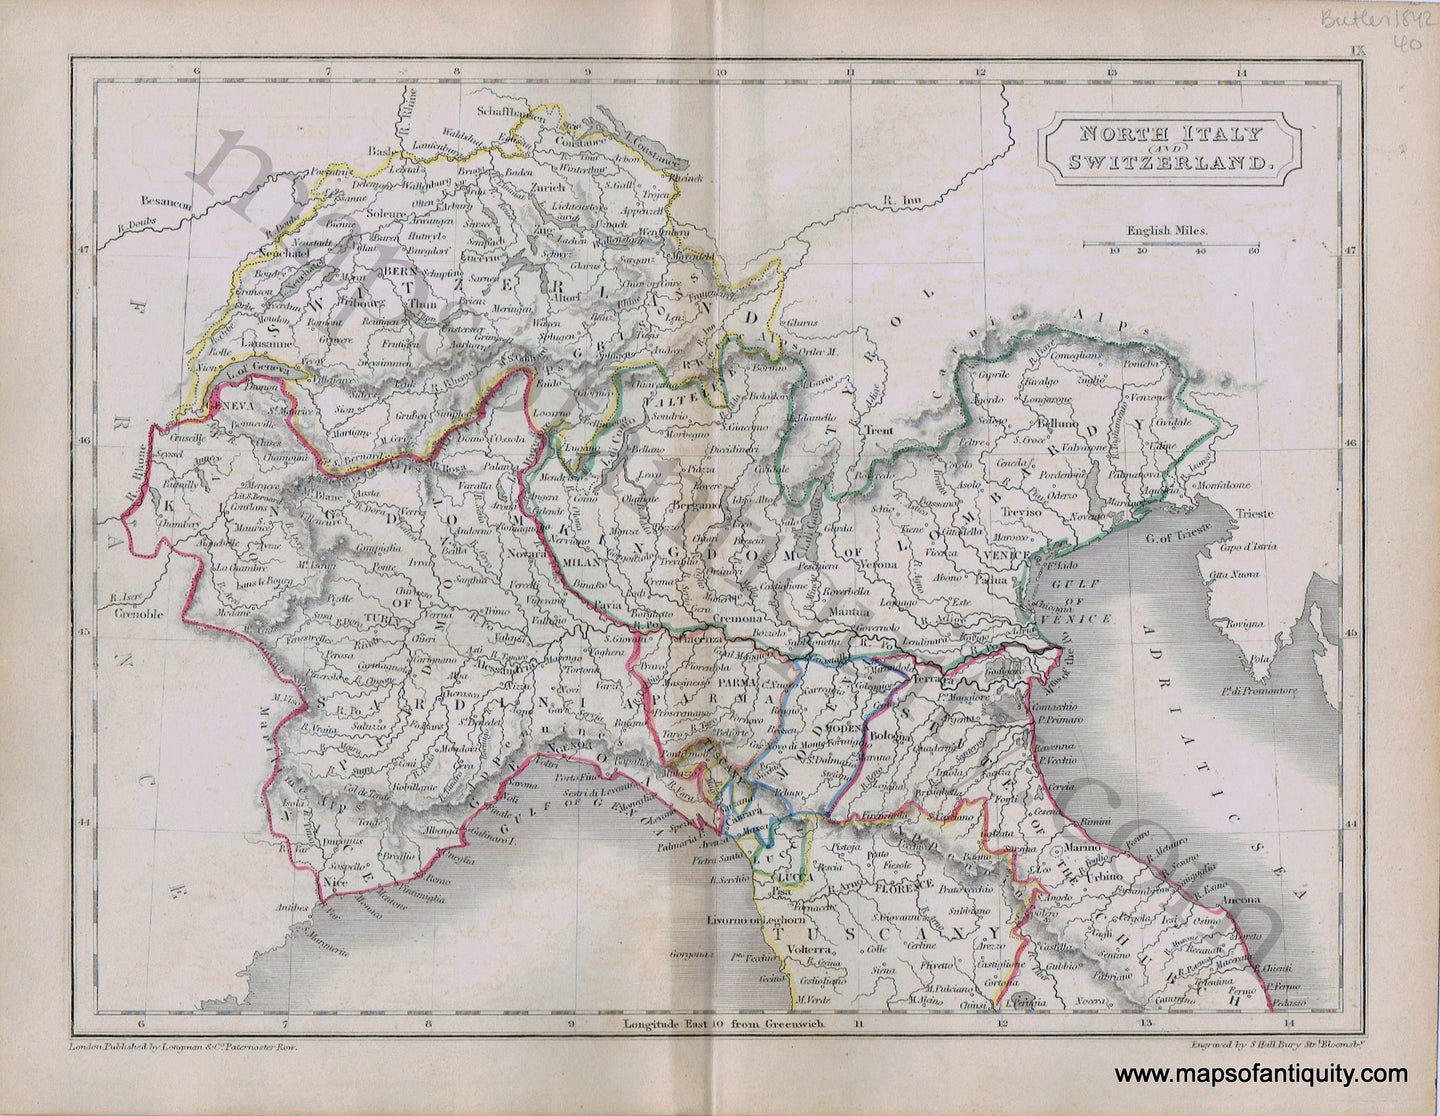 Antique-Hand-Colored-Map-North-Italy-and-Switzerland.-1842-Butler-Italy-Switzerland-1800s-19th-century-Maps-of-Antiquity